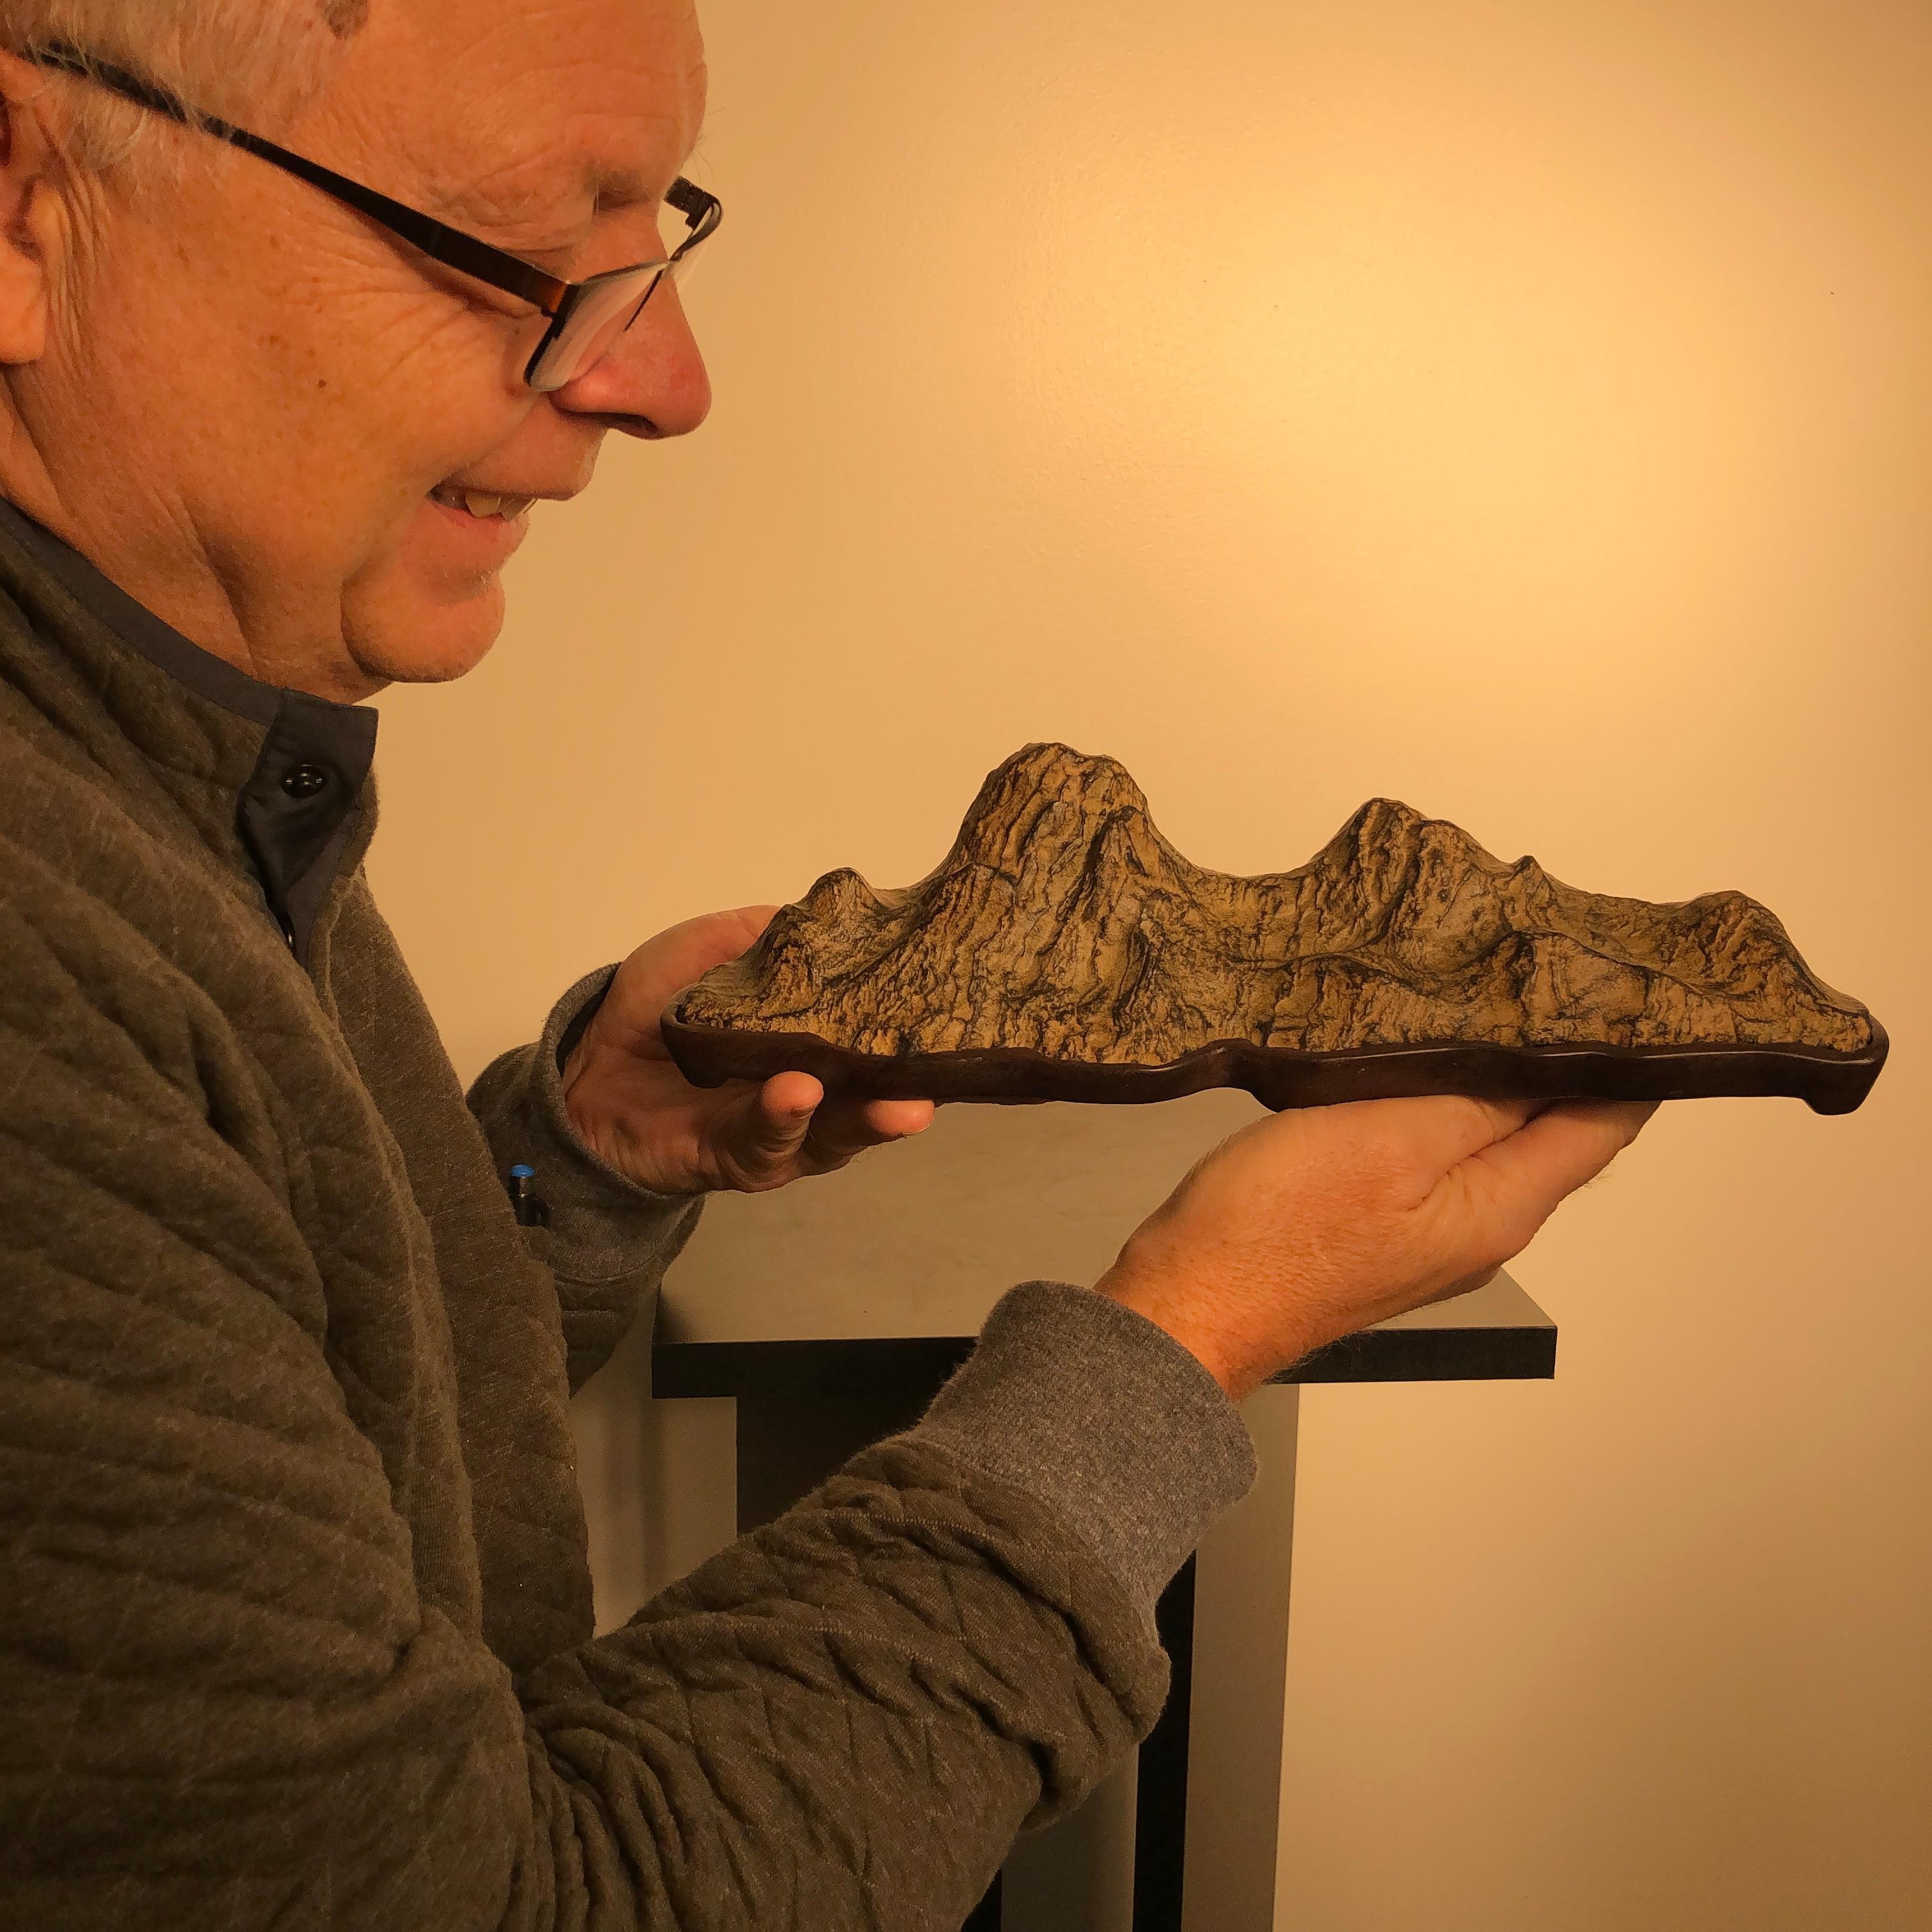 Fantastic tall mountain scholar rock, natural bonsai suiseki with eight high peaks and 10 inches long

What do you see- mountains, trails in the Rockies or Himalayas?

Here's a great one-of-a-kind sculptural candidate for your special Asian room